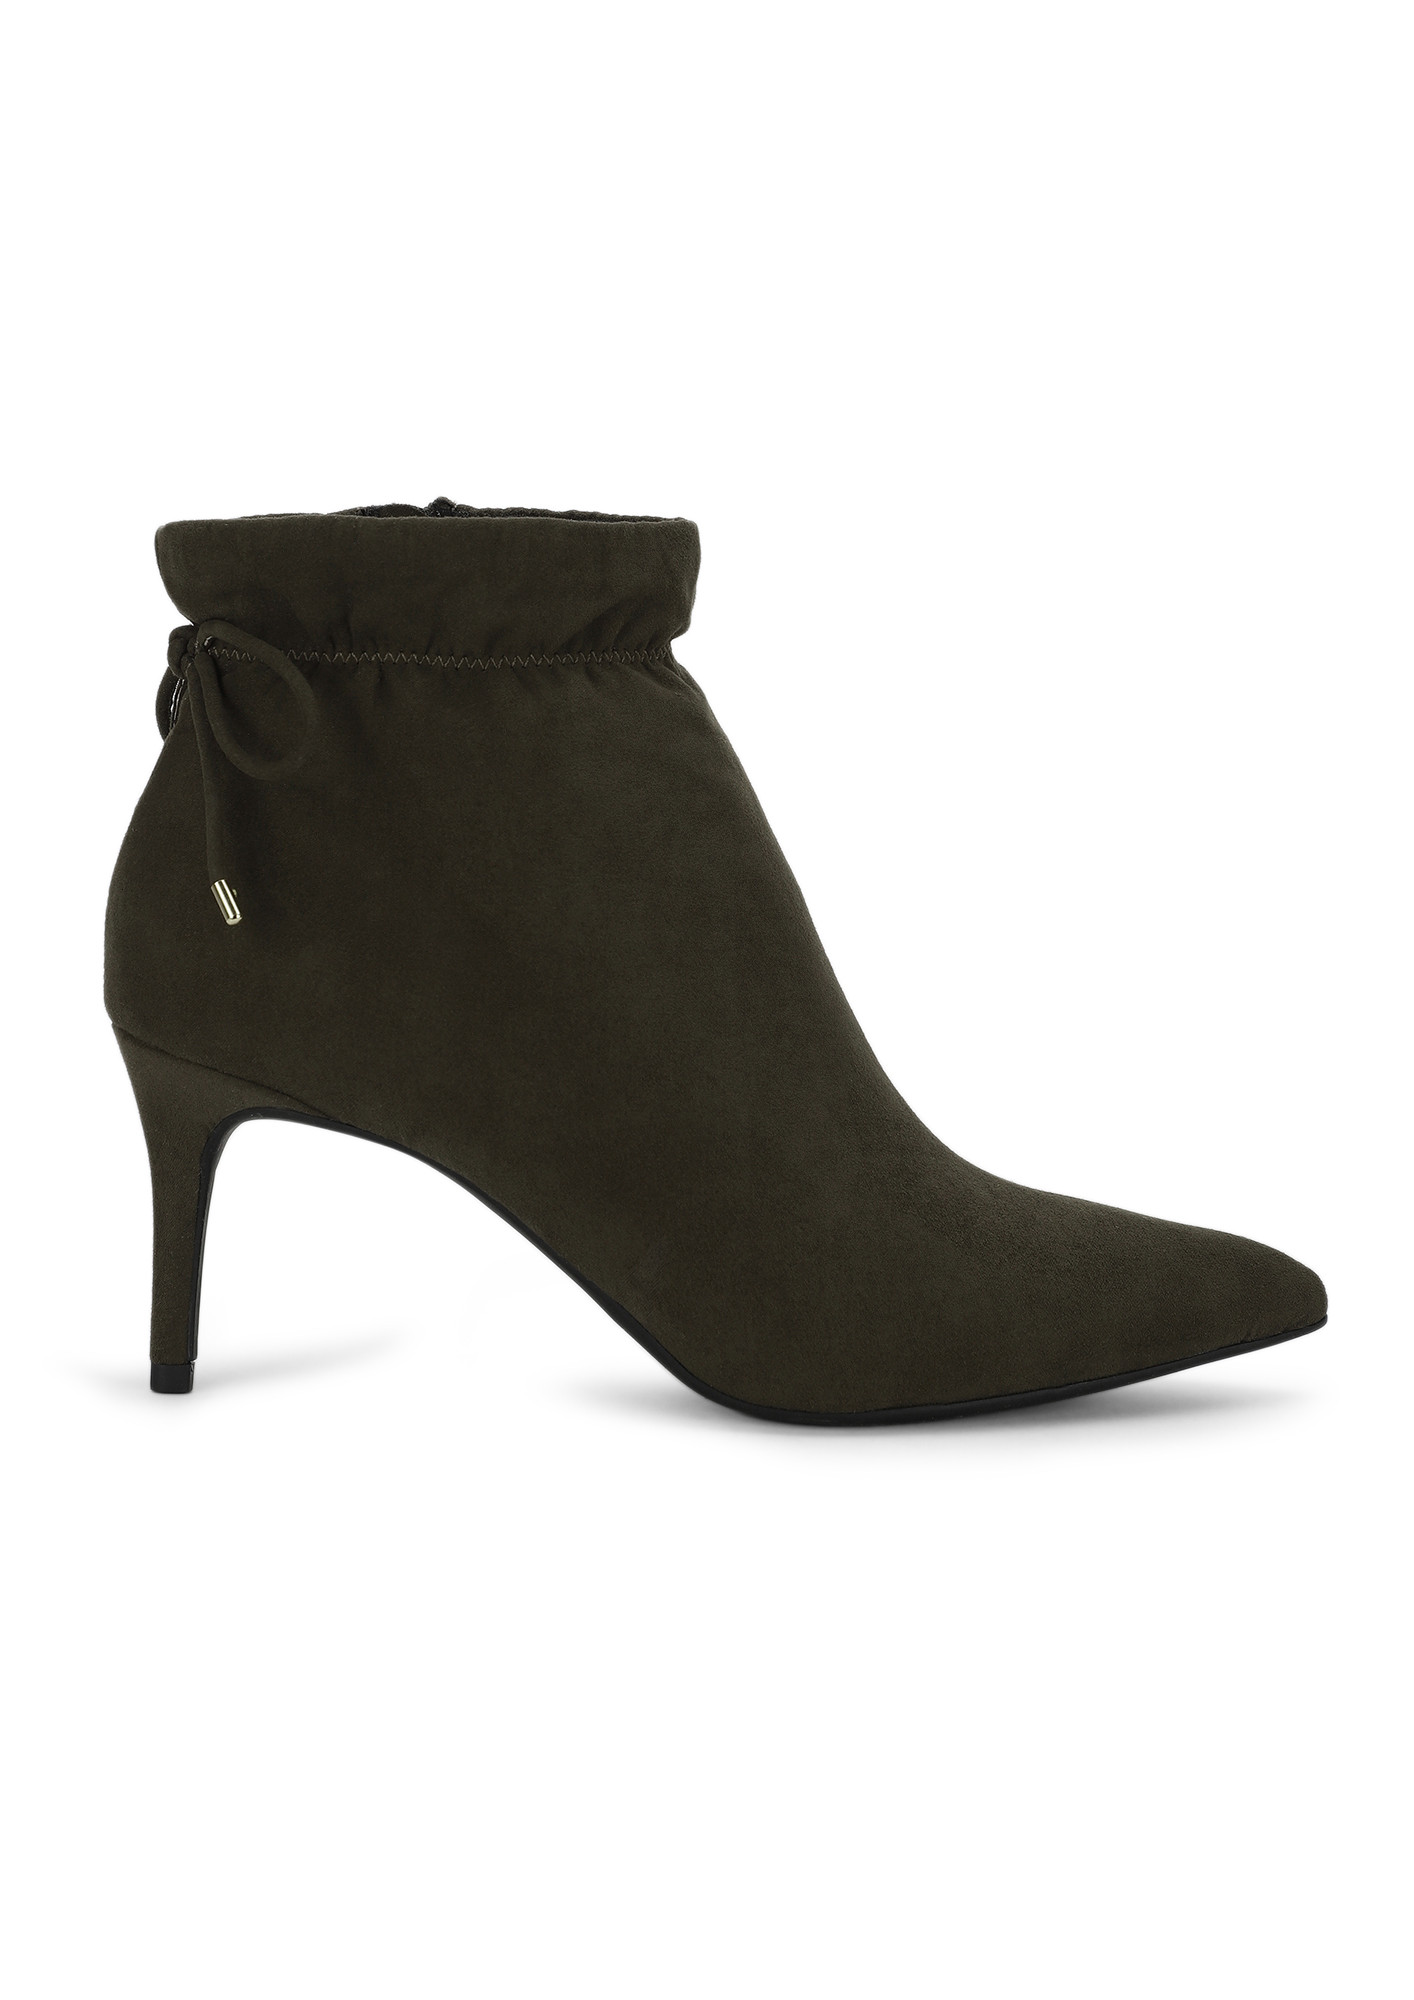 PRETTY POINTED OLIVE GREEN ANKLE BOOTS